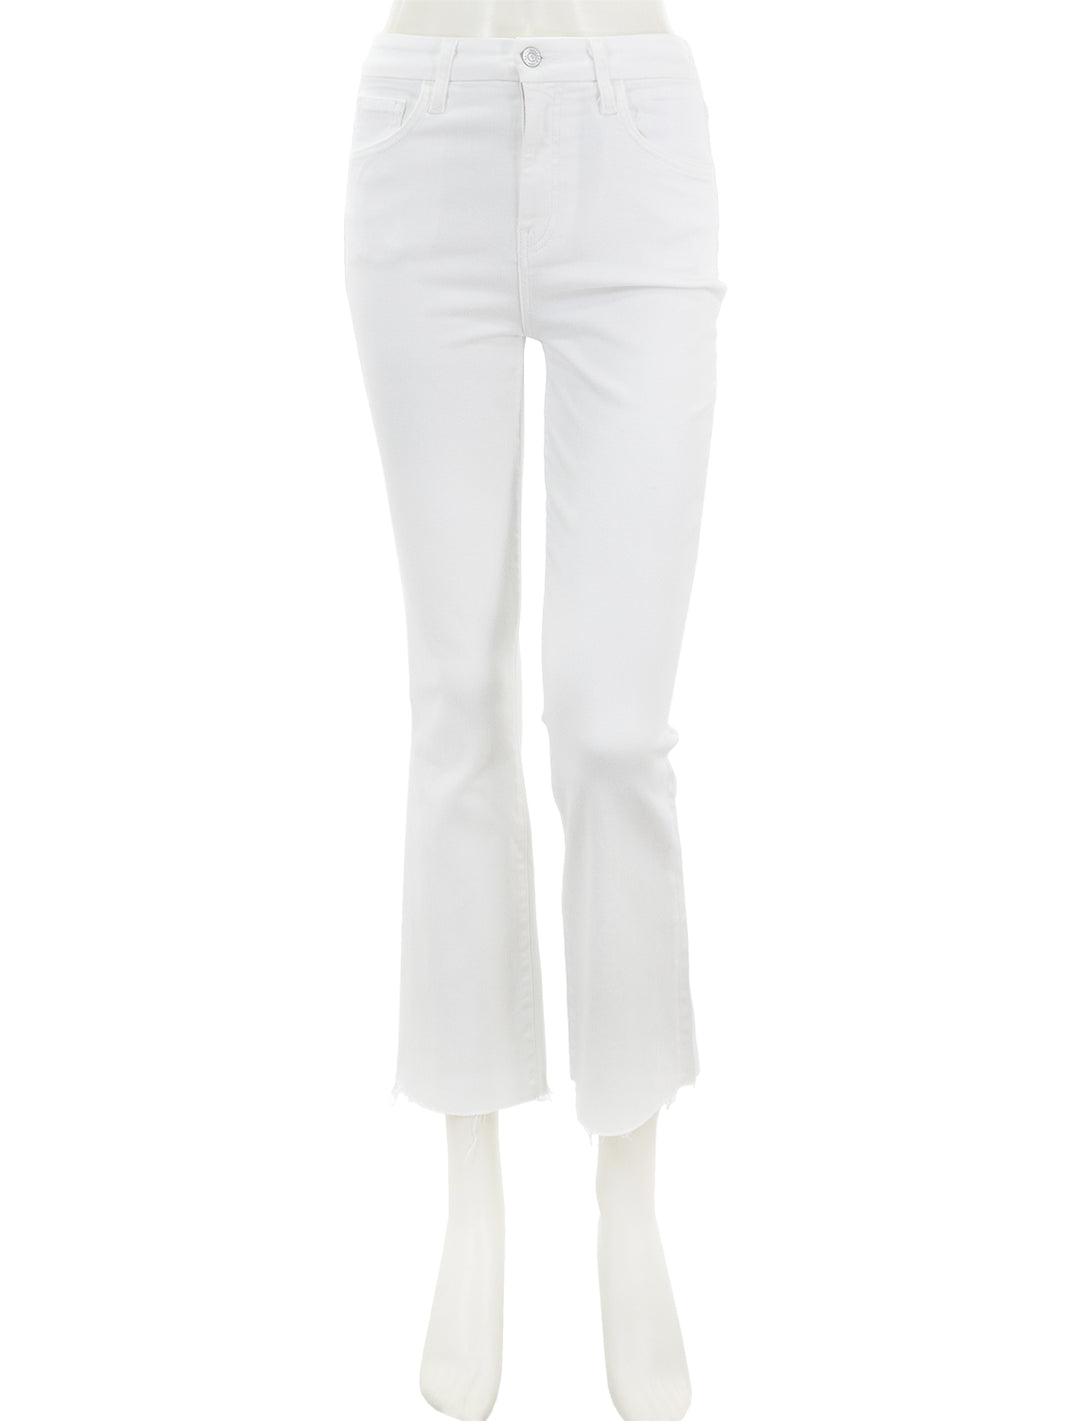 Front view of Frank & Eileen's killian crop flares in white.